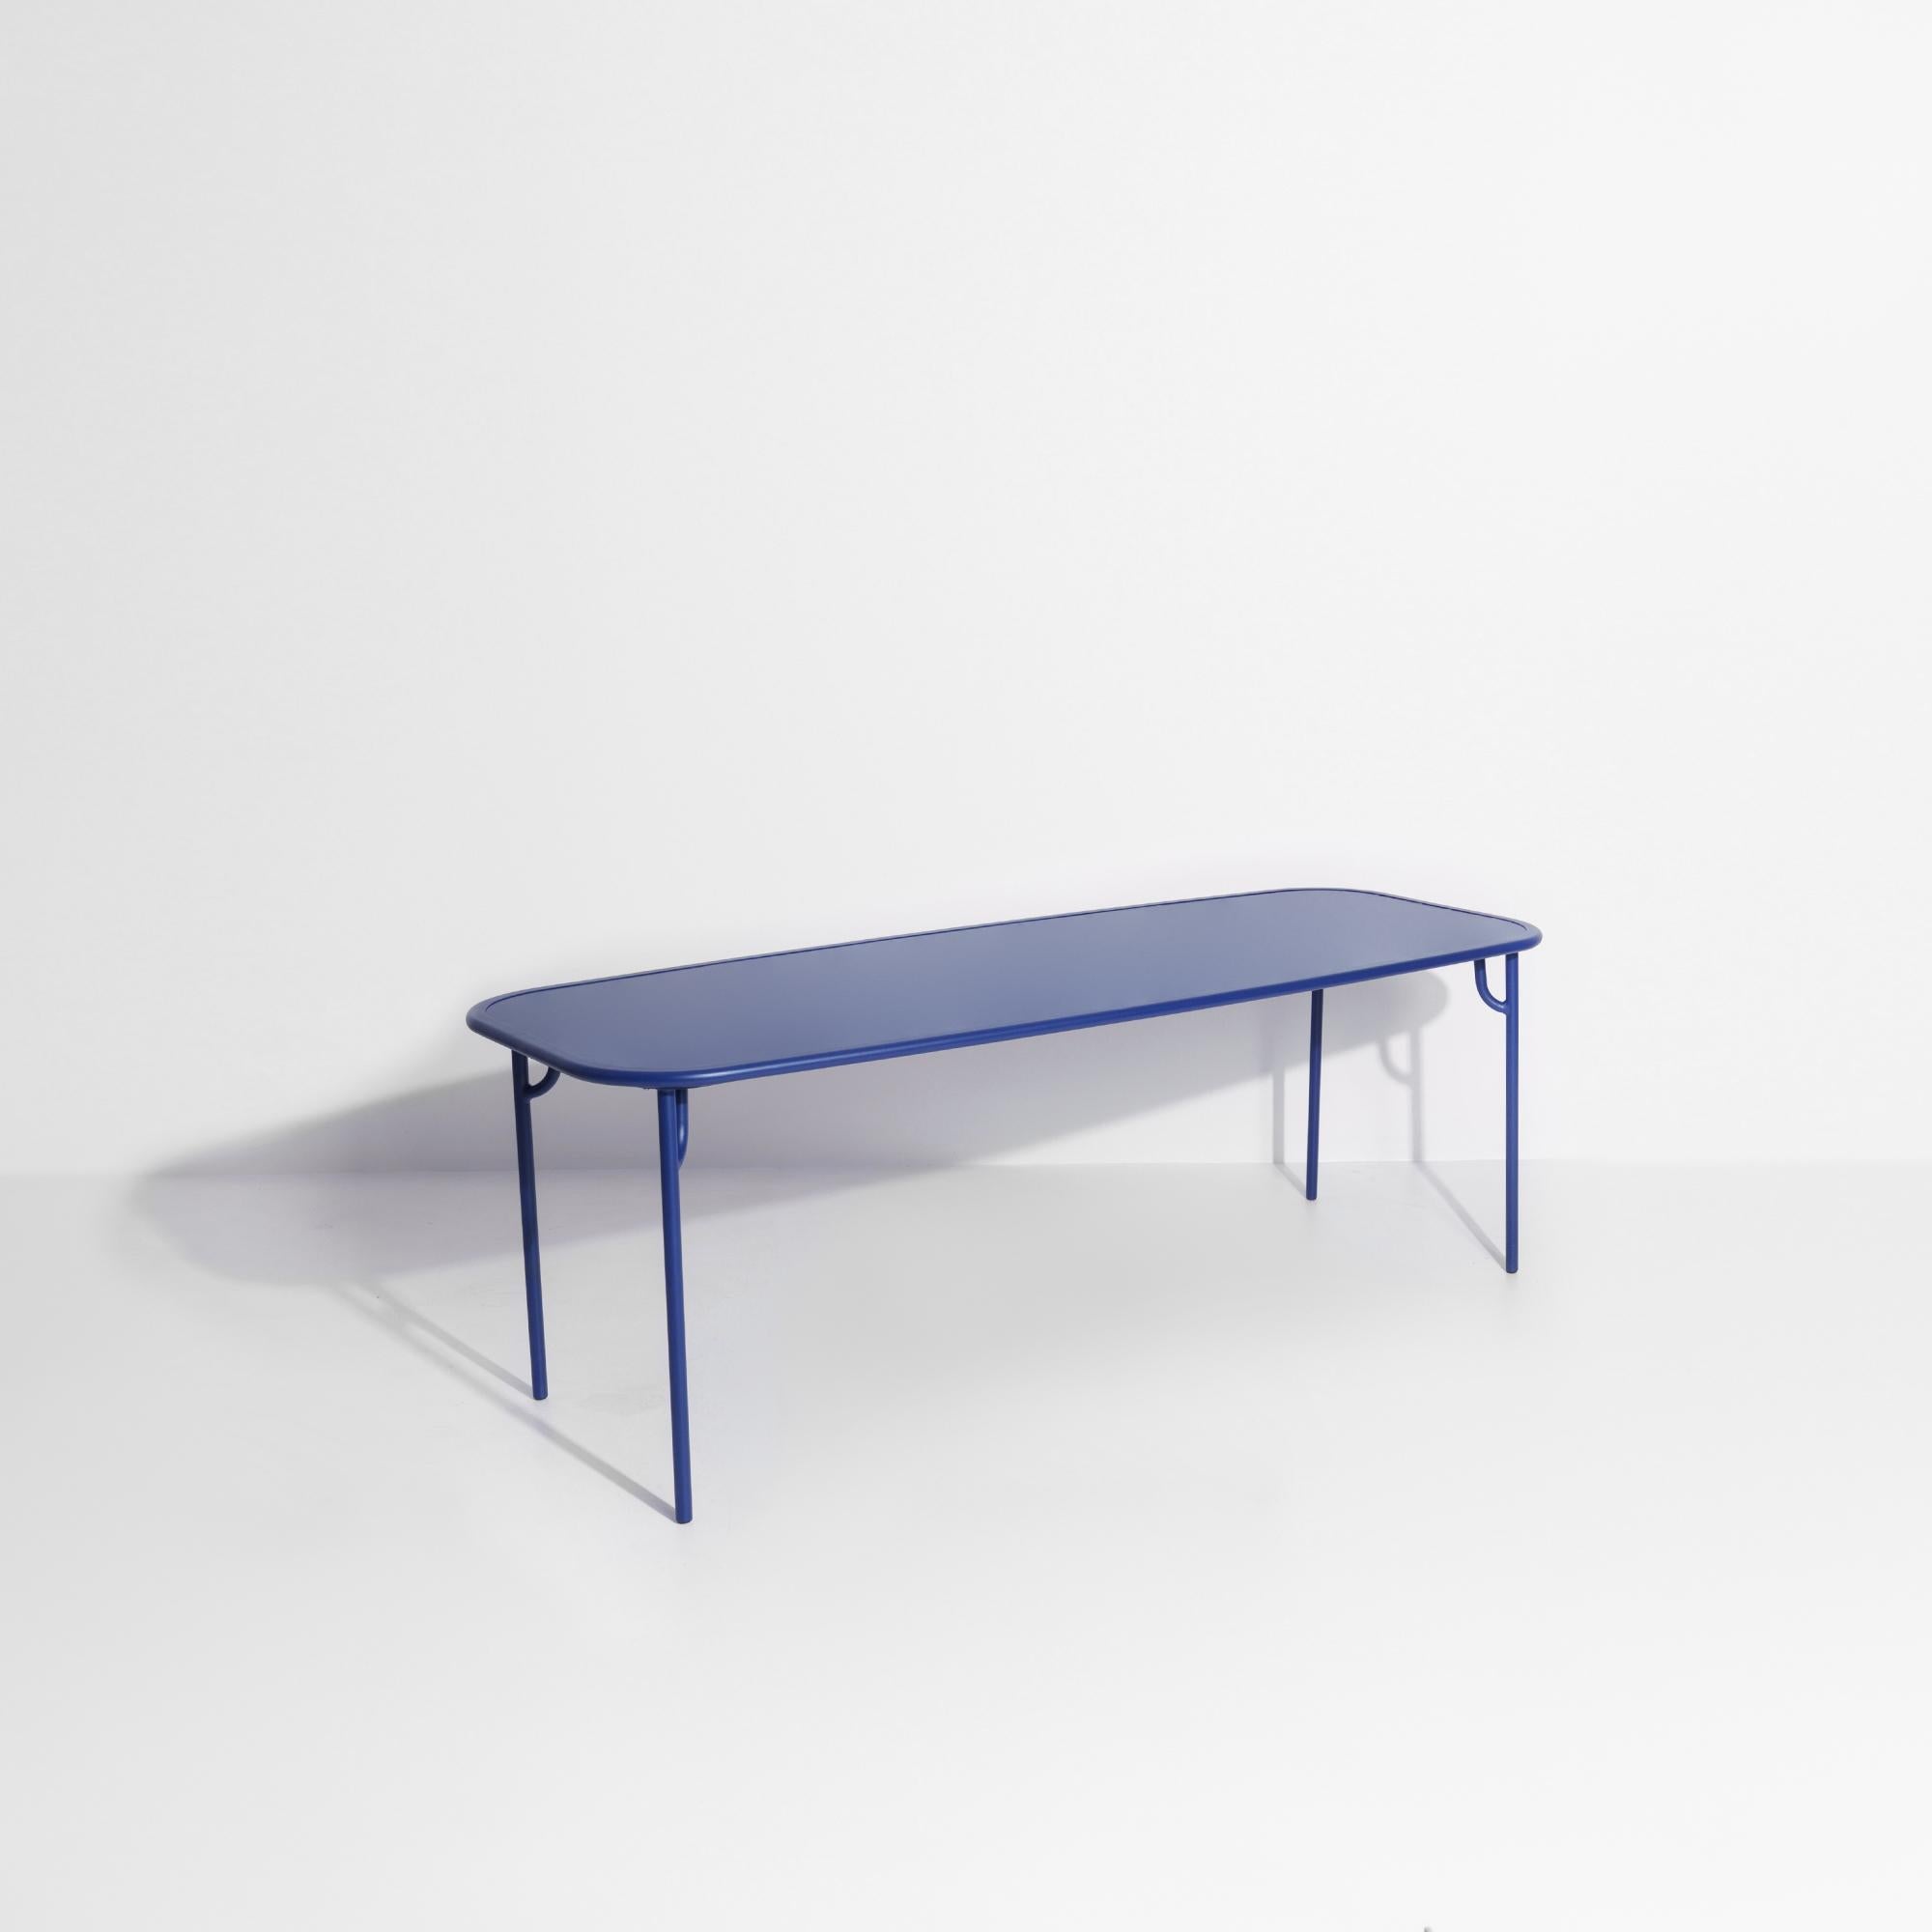 Contemporary Petite Friture Week-End Large Plain Rectangular Dining Table in Blue Aluminium For Sale